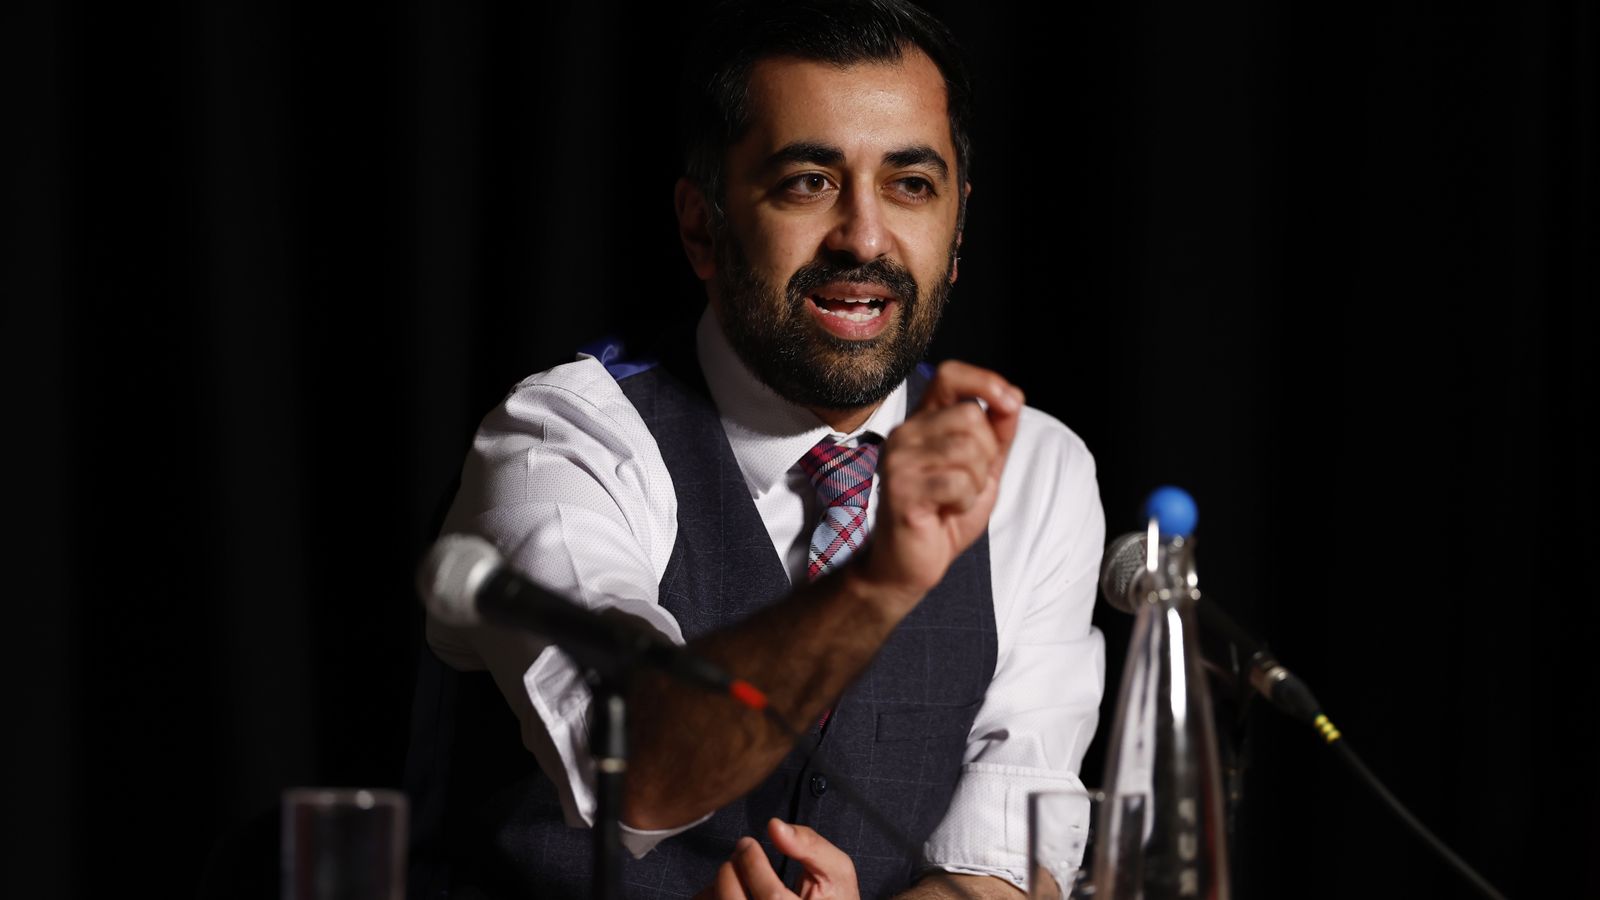 SNP leadership candidate Humza Yousaf promises to make Scotland an 'international leader in human rights' if elected